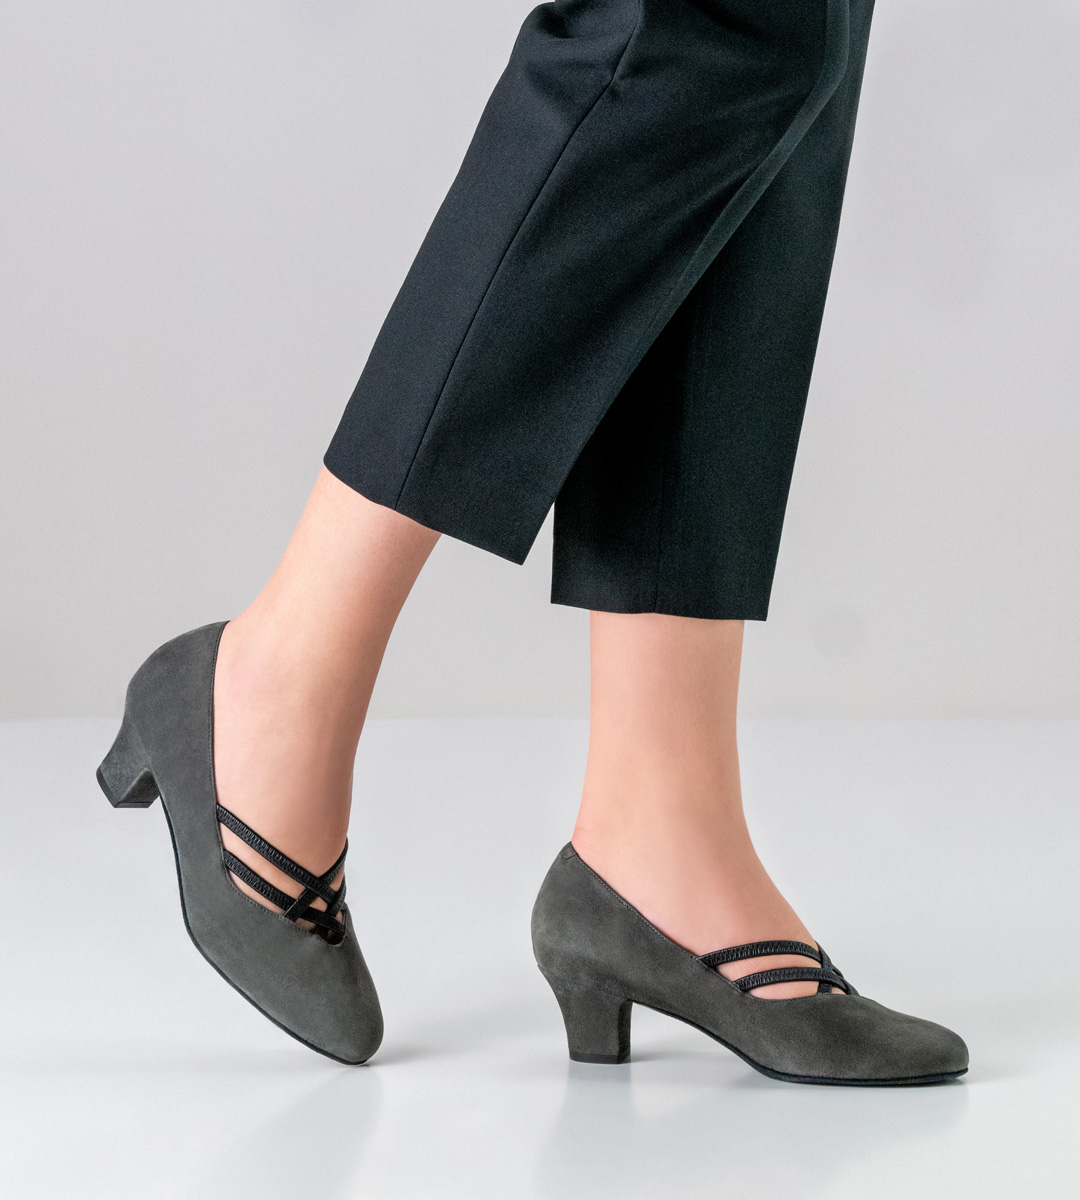 grey ladies dance shoe from Werner Kern with exchangeable footbed